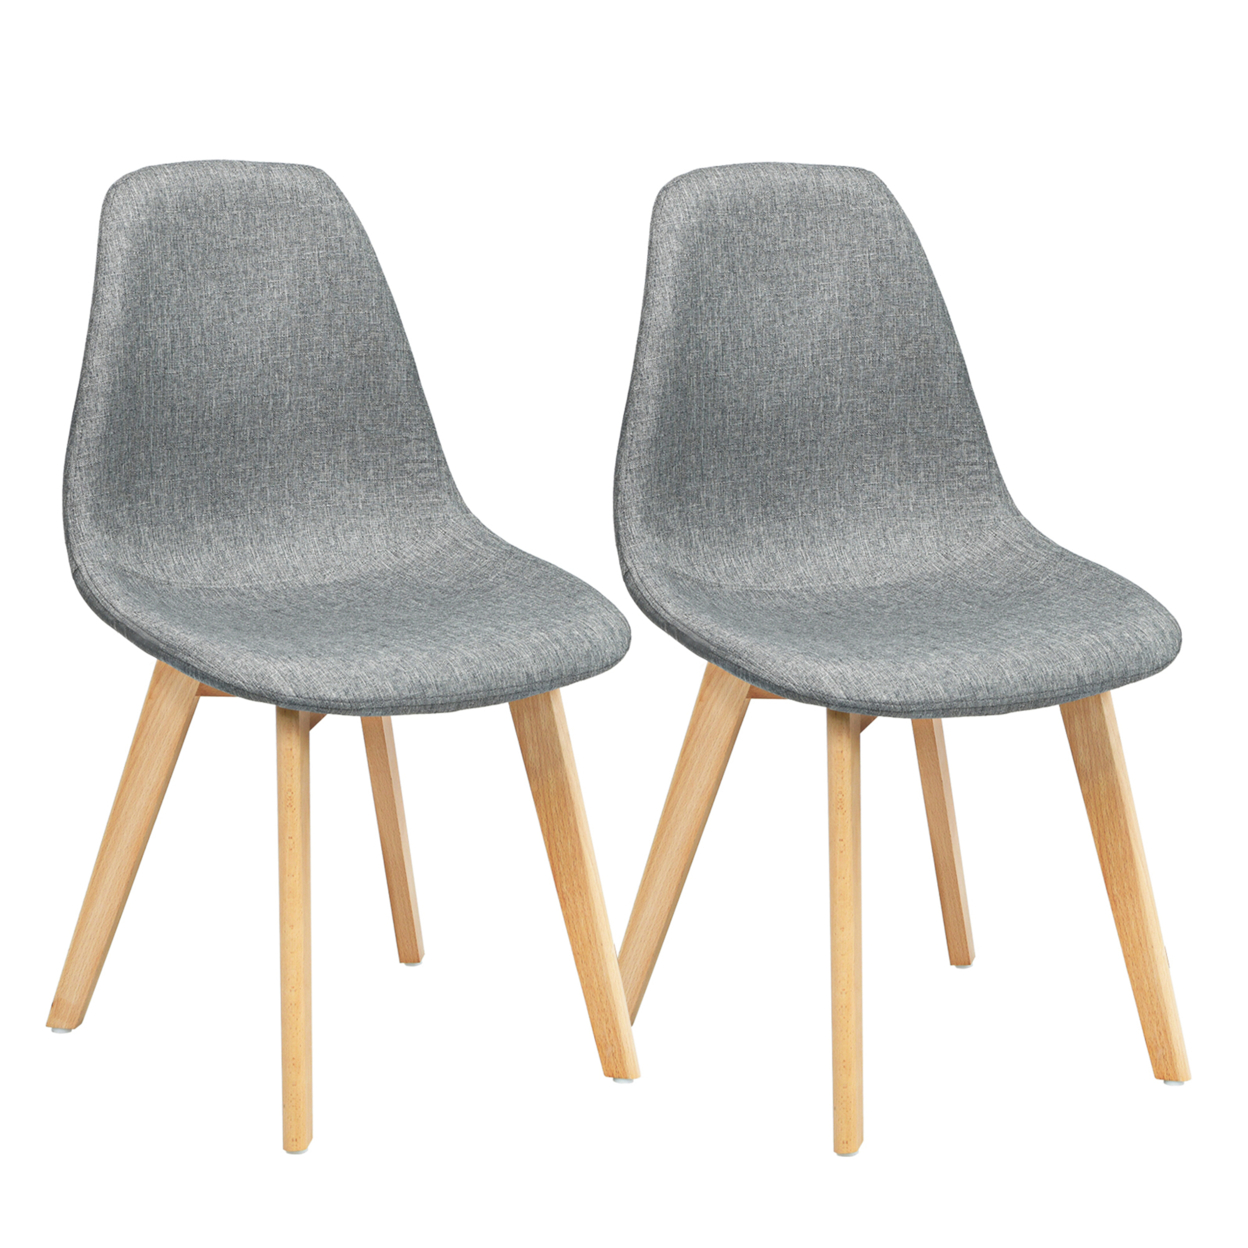 Set Of 2 Dining Chairs Fabric Cushion Kitchen Side Chairs Gray